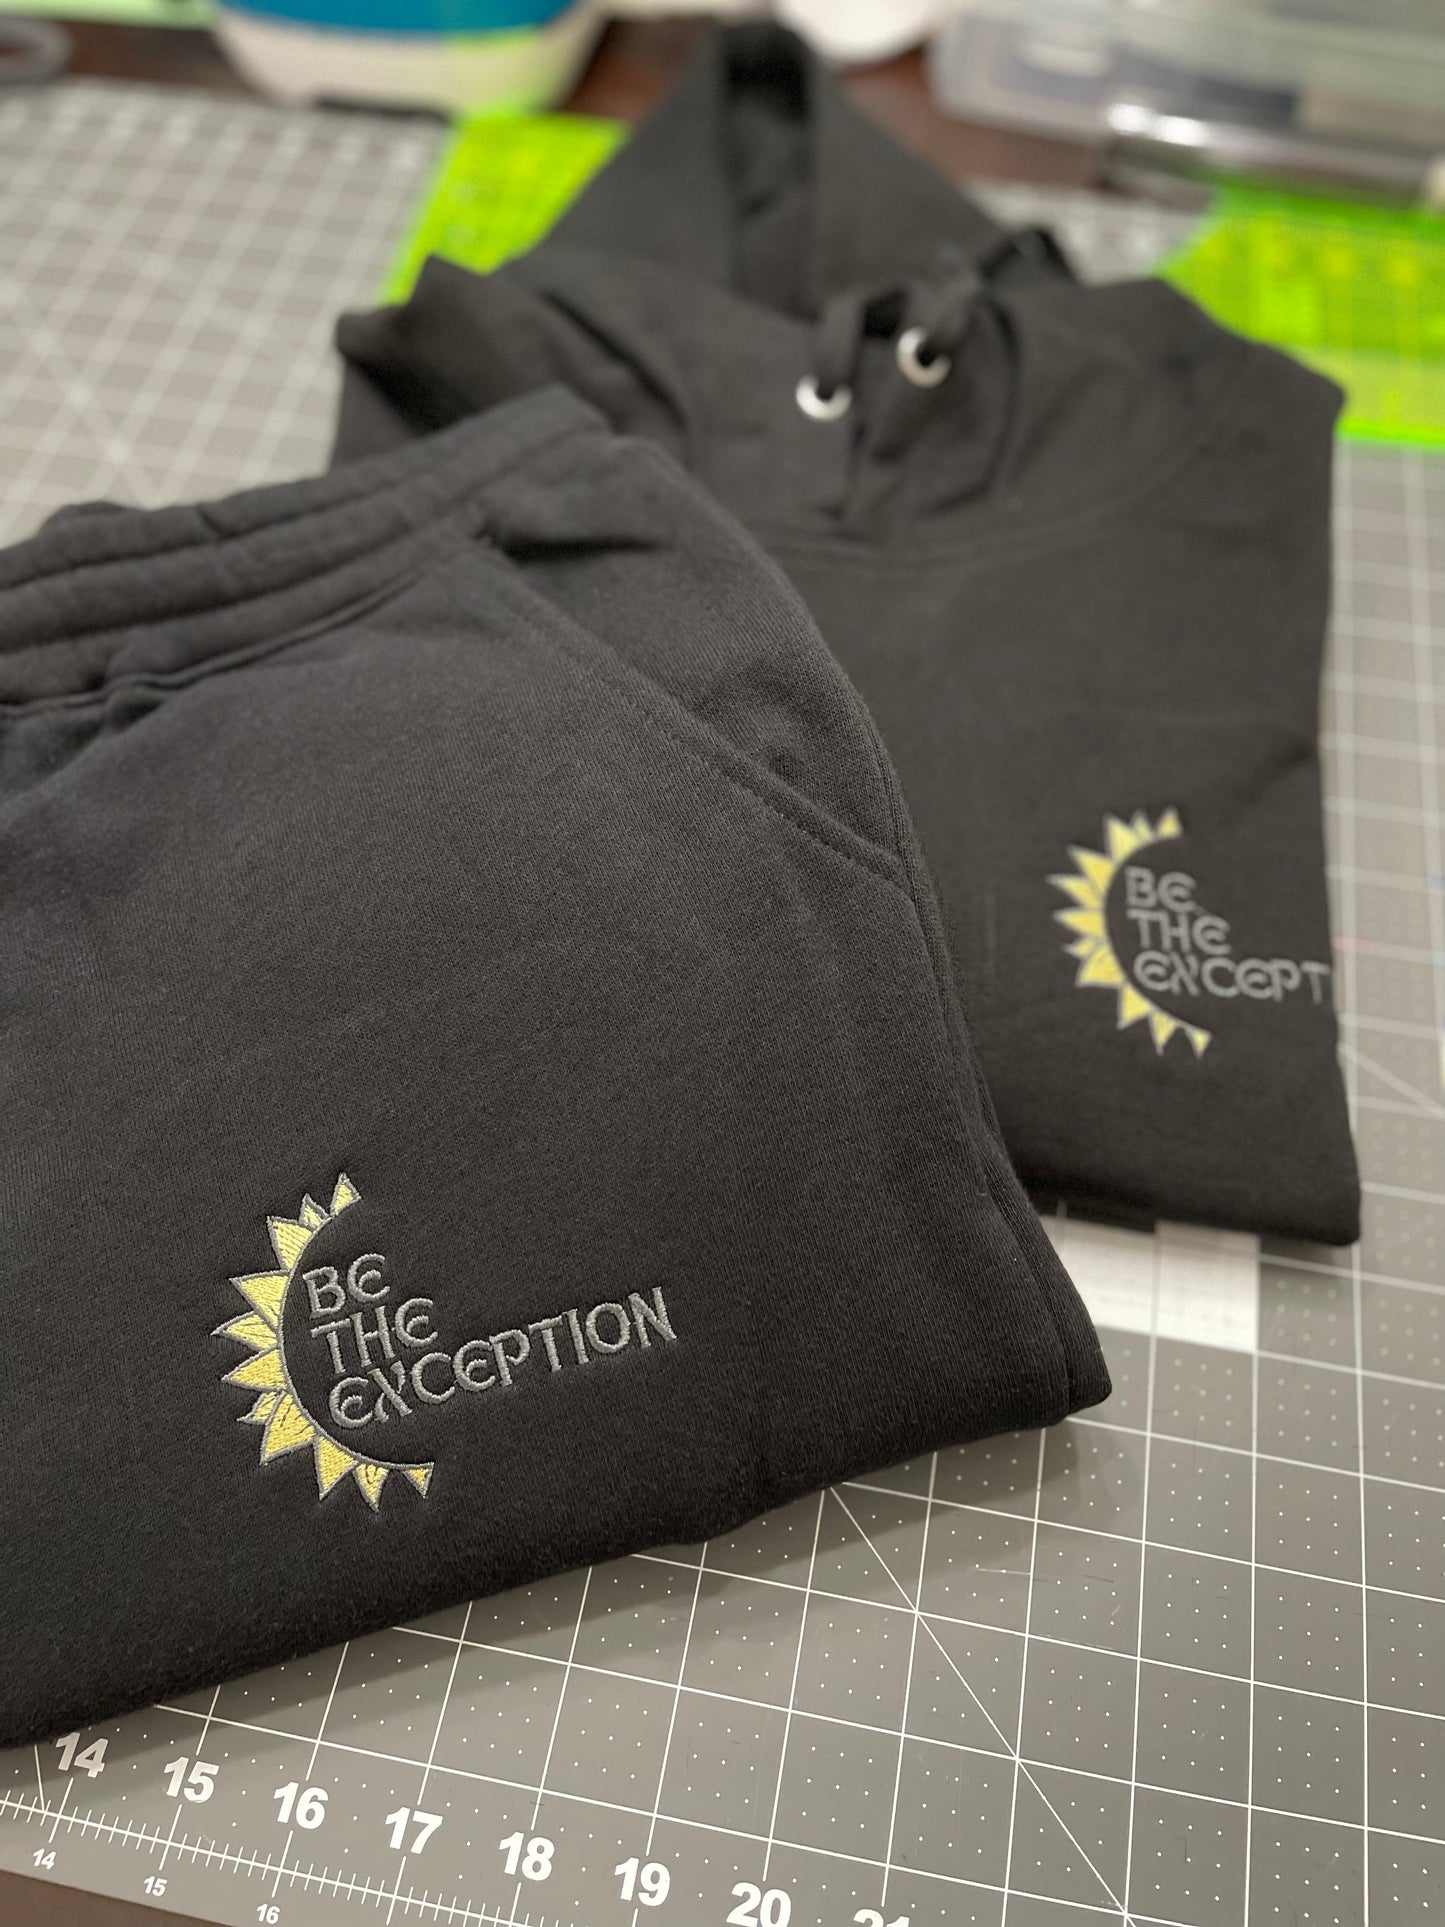 Be The Exception - Sweatsuit Set